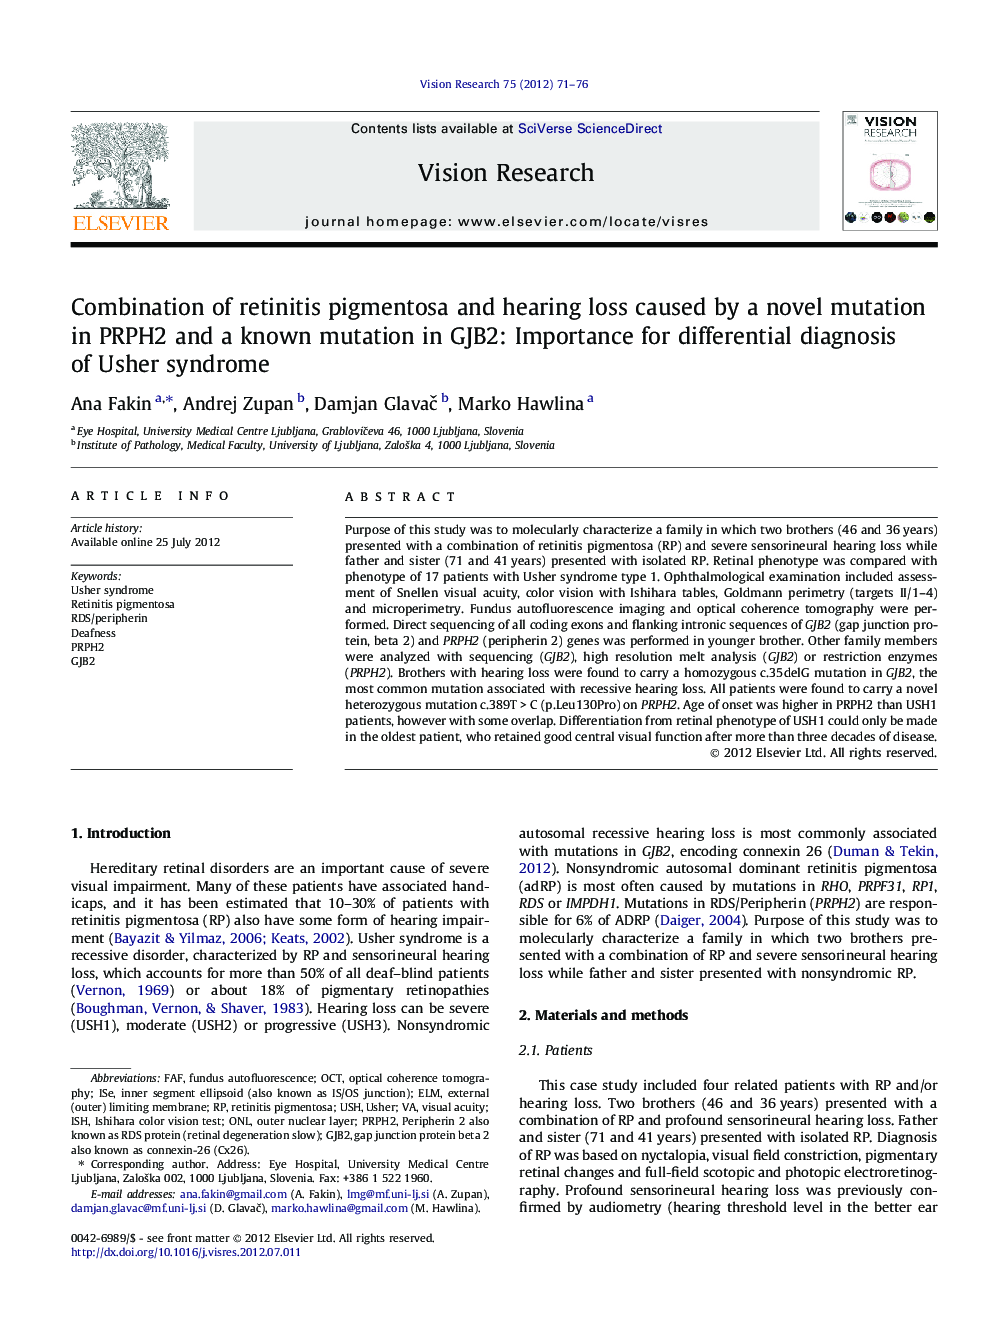 Combination of retinitis pigmentosa and hearing loss caused by a novel mutation in PRPH2 and a known mutation in GJB2: Importance for differential diagnosis of Usher syndrome